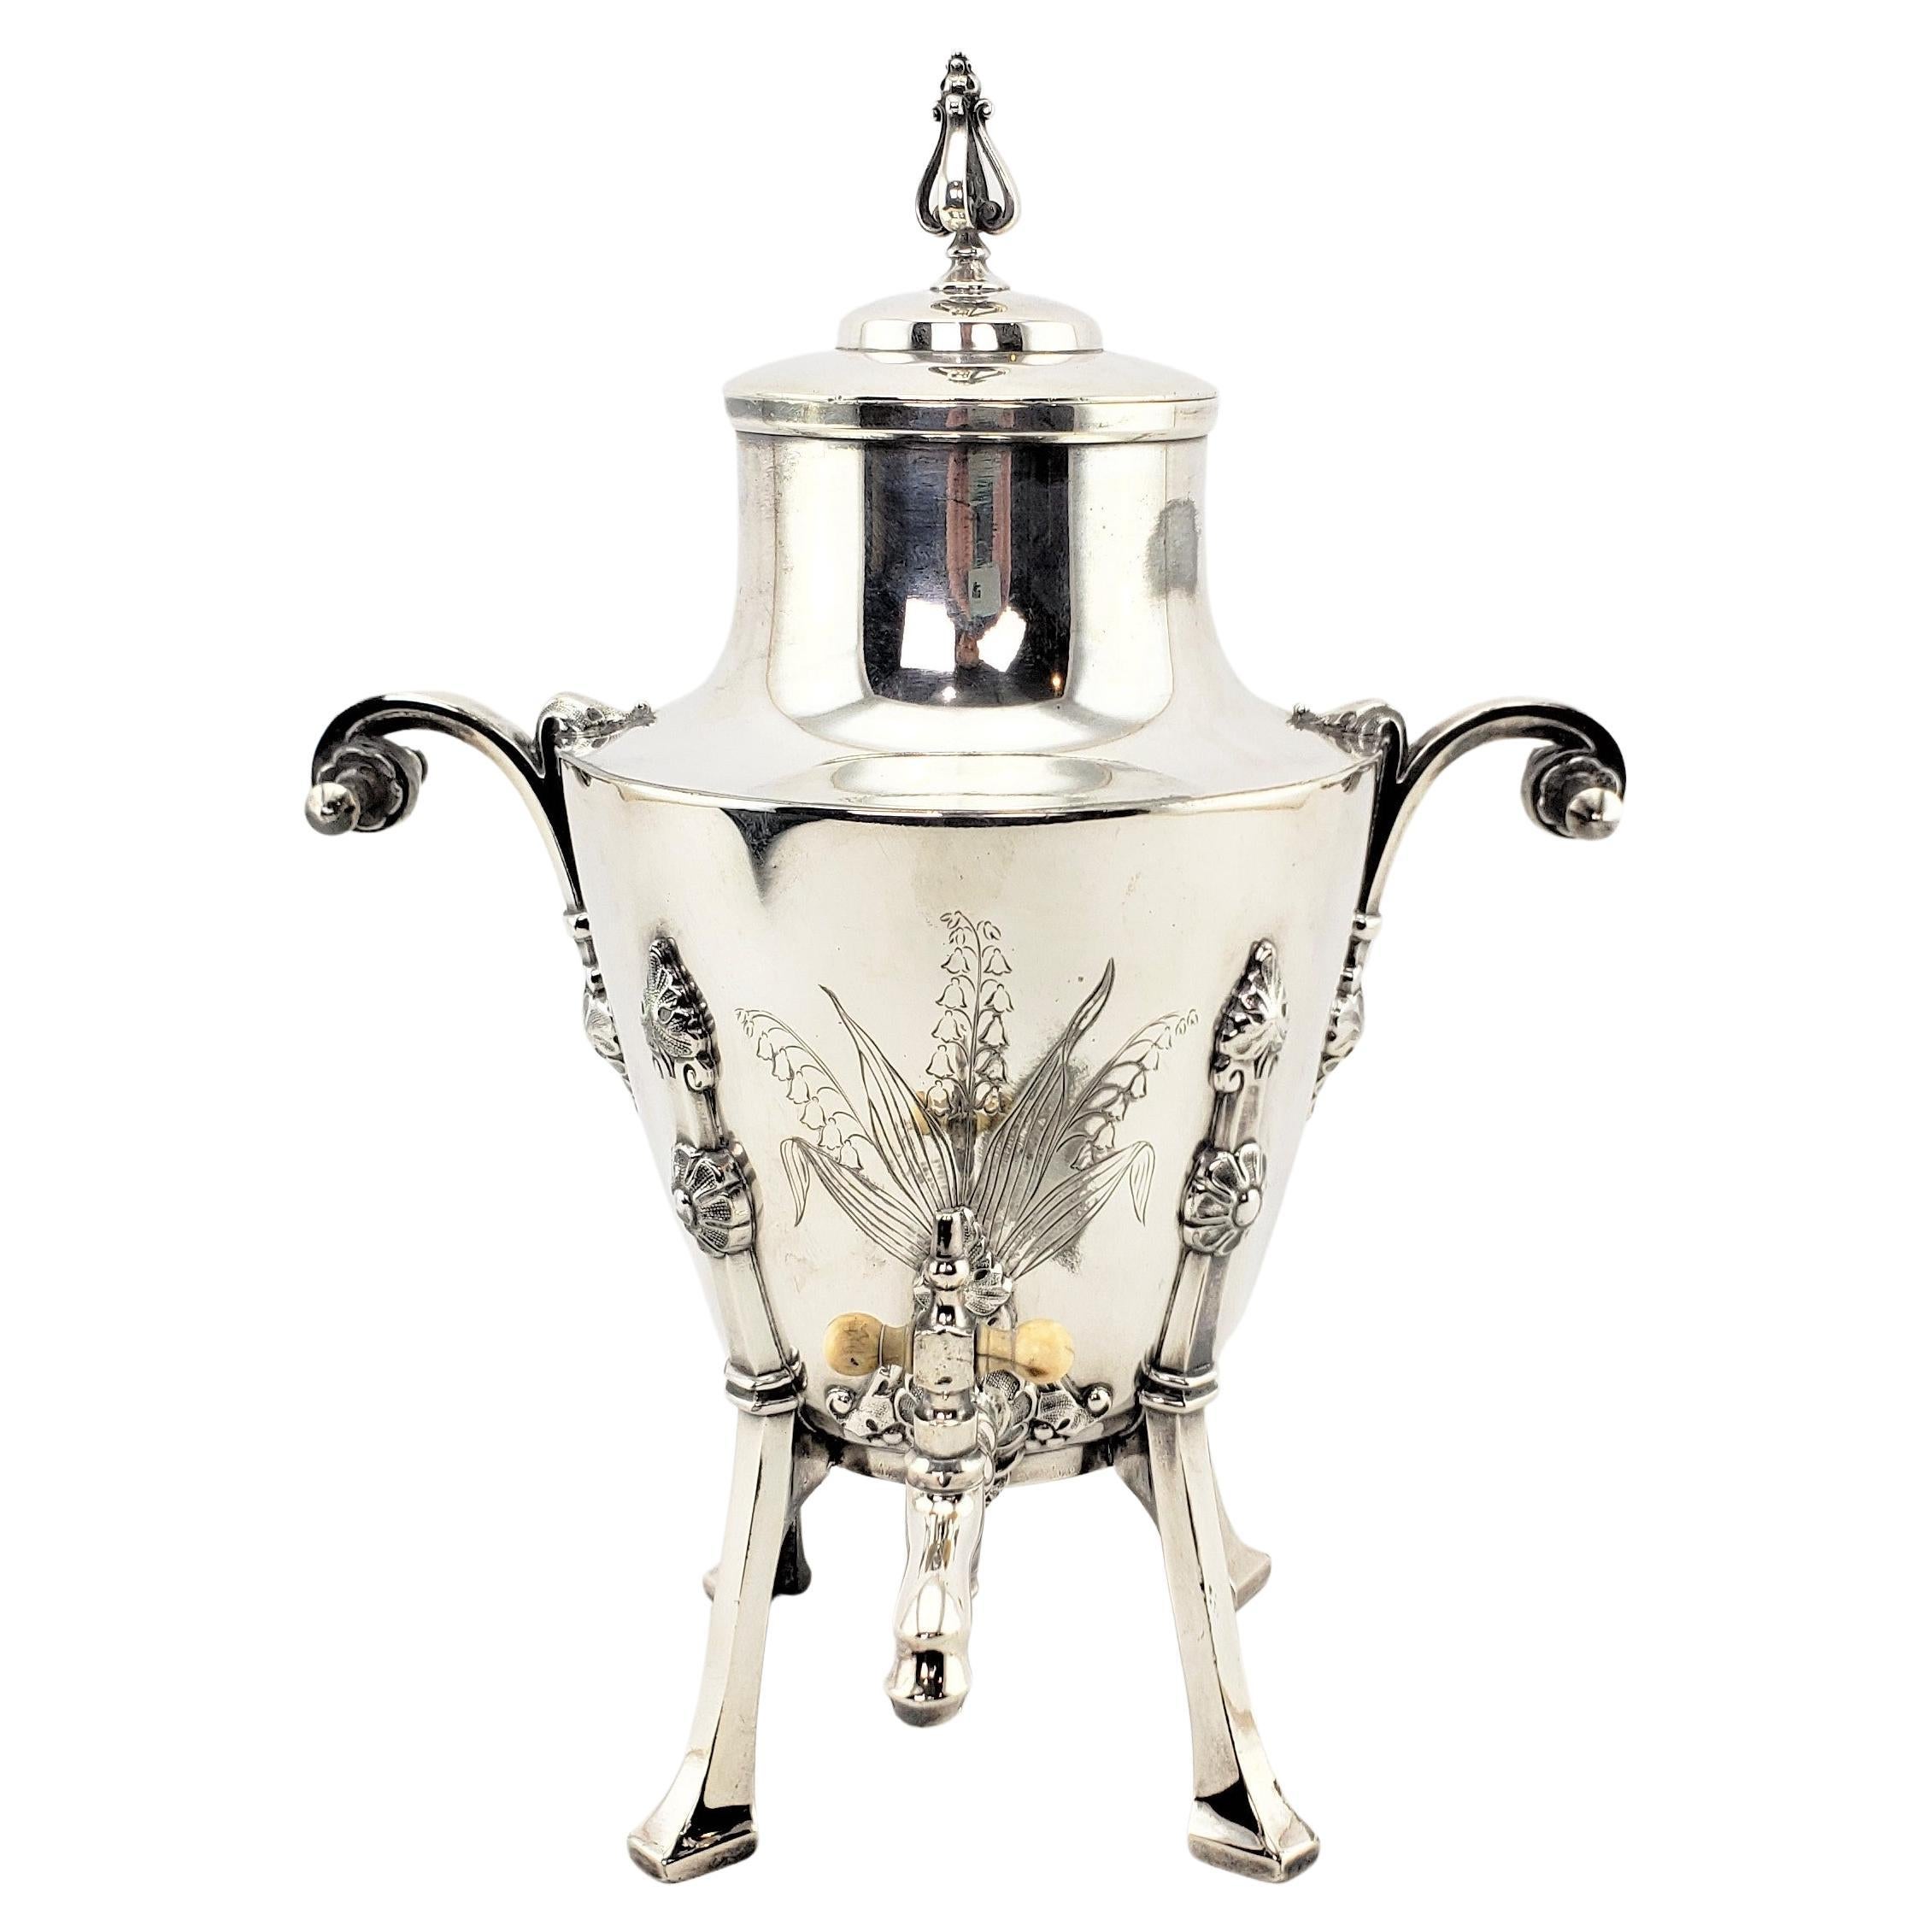 Antique Aesthetic Movement Silver Plated Hot Water Urn with Floral Decoration